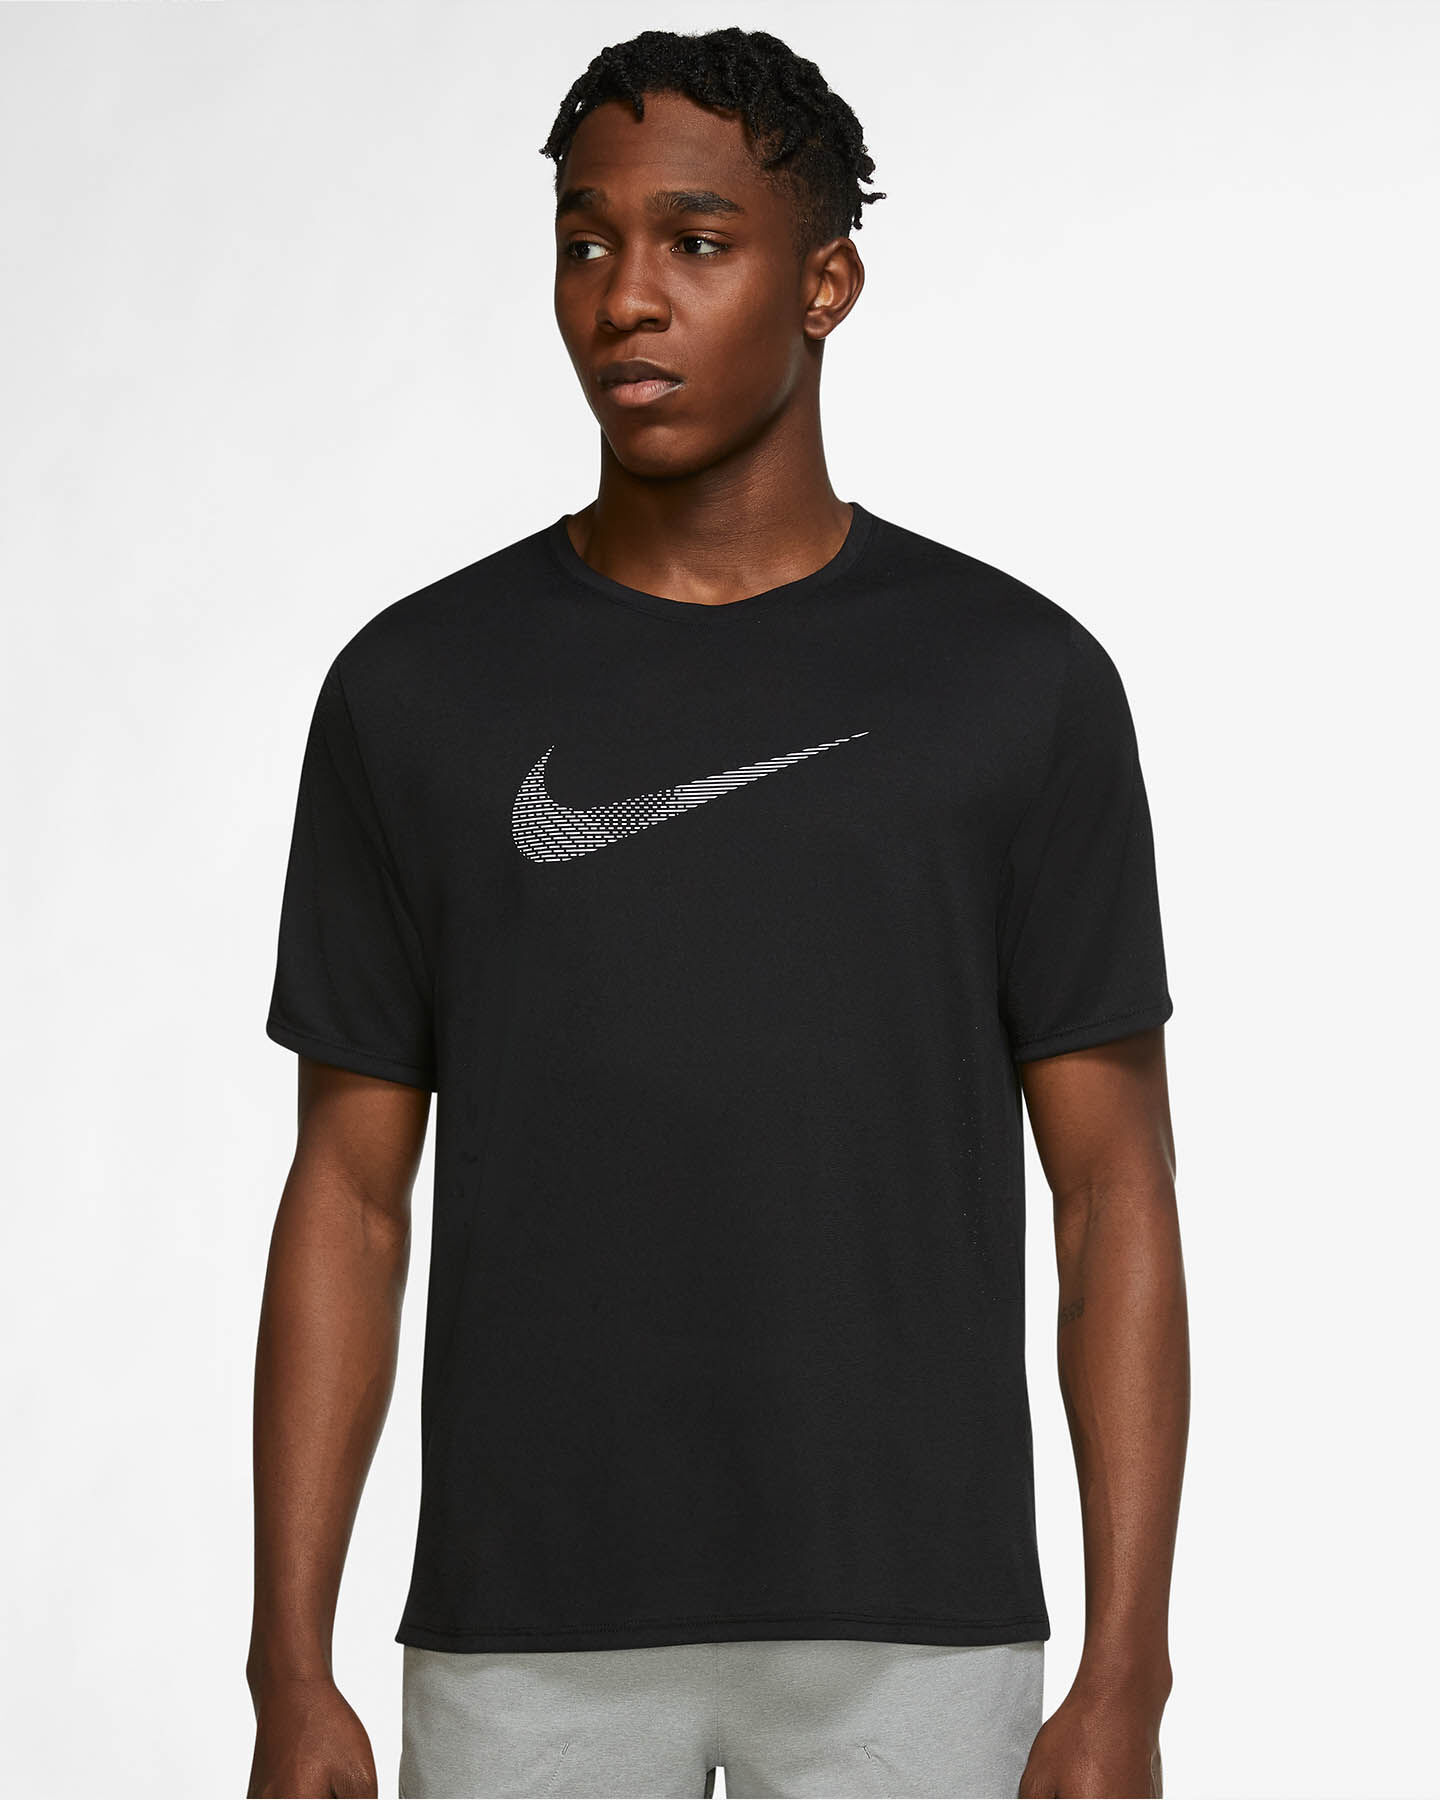  T-Shirt running NIKE DRI-FIT RUN DIVISION GX MILER M S5320007|010|S scatto 0